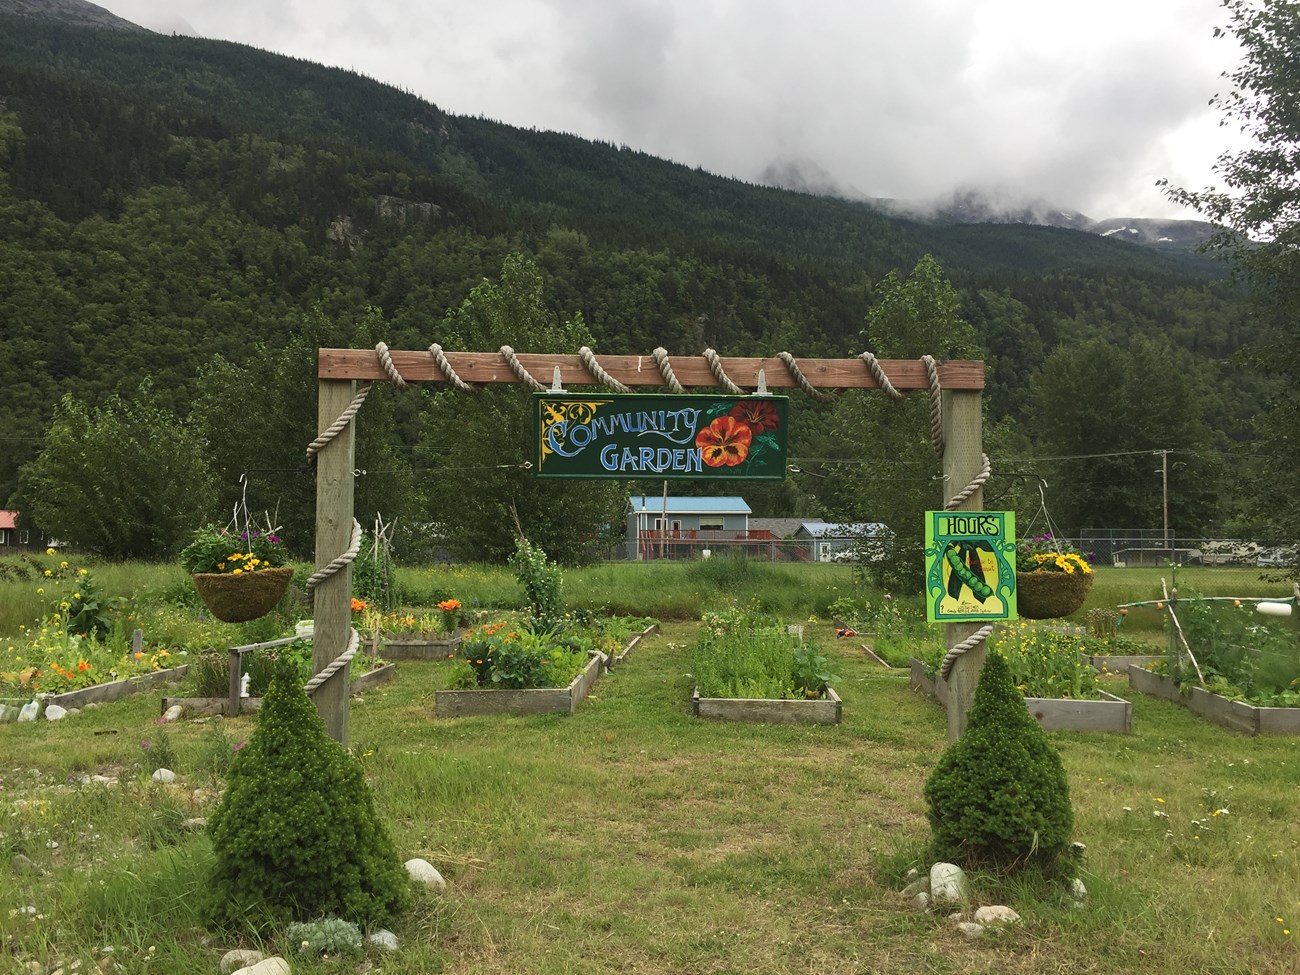 A picture of a garden plots with sign reading "Community Garden"